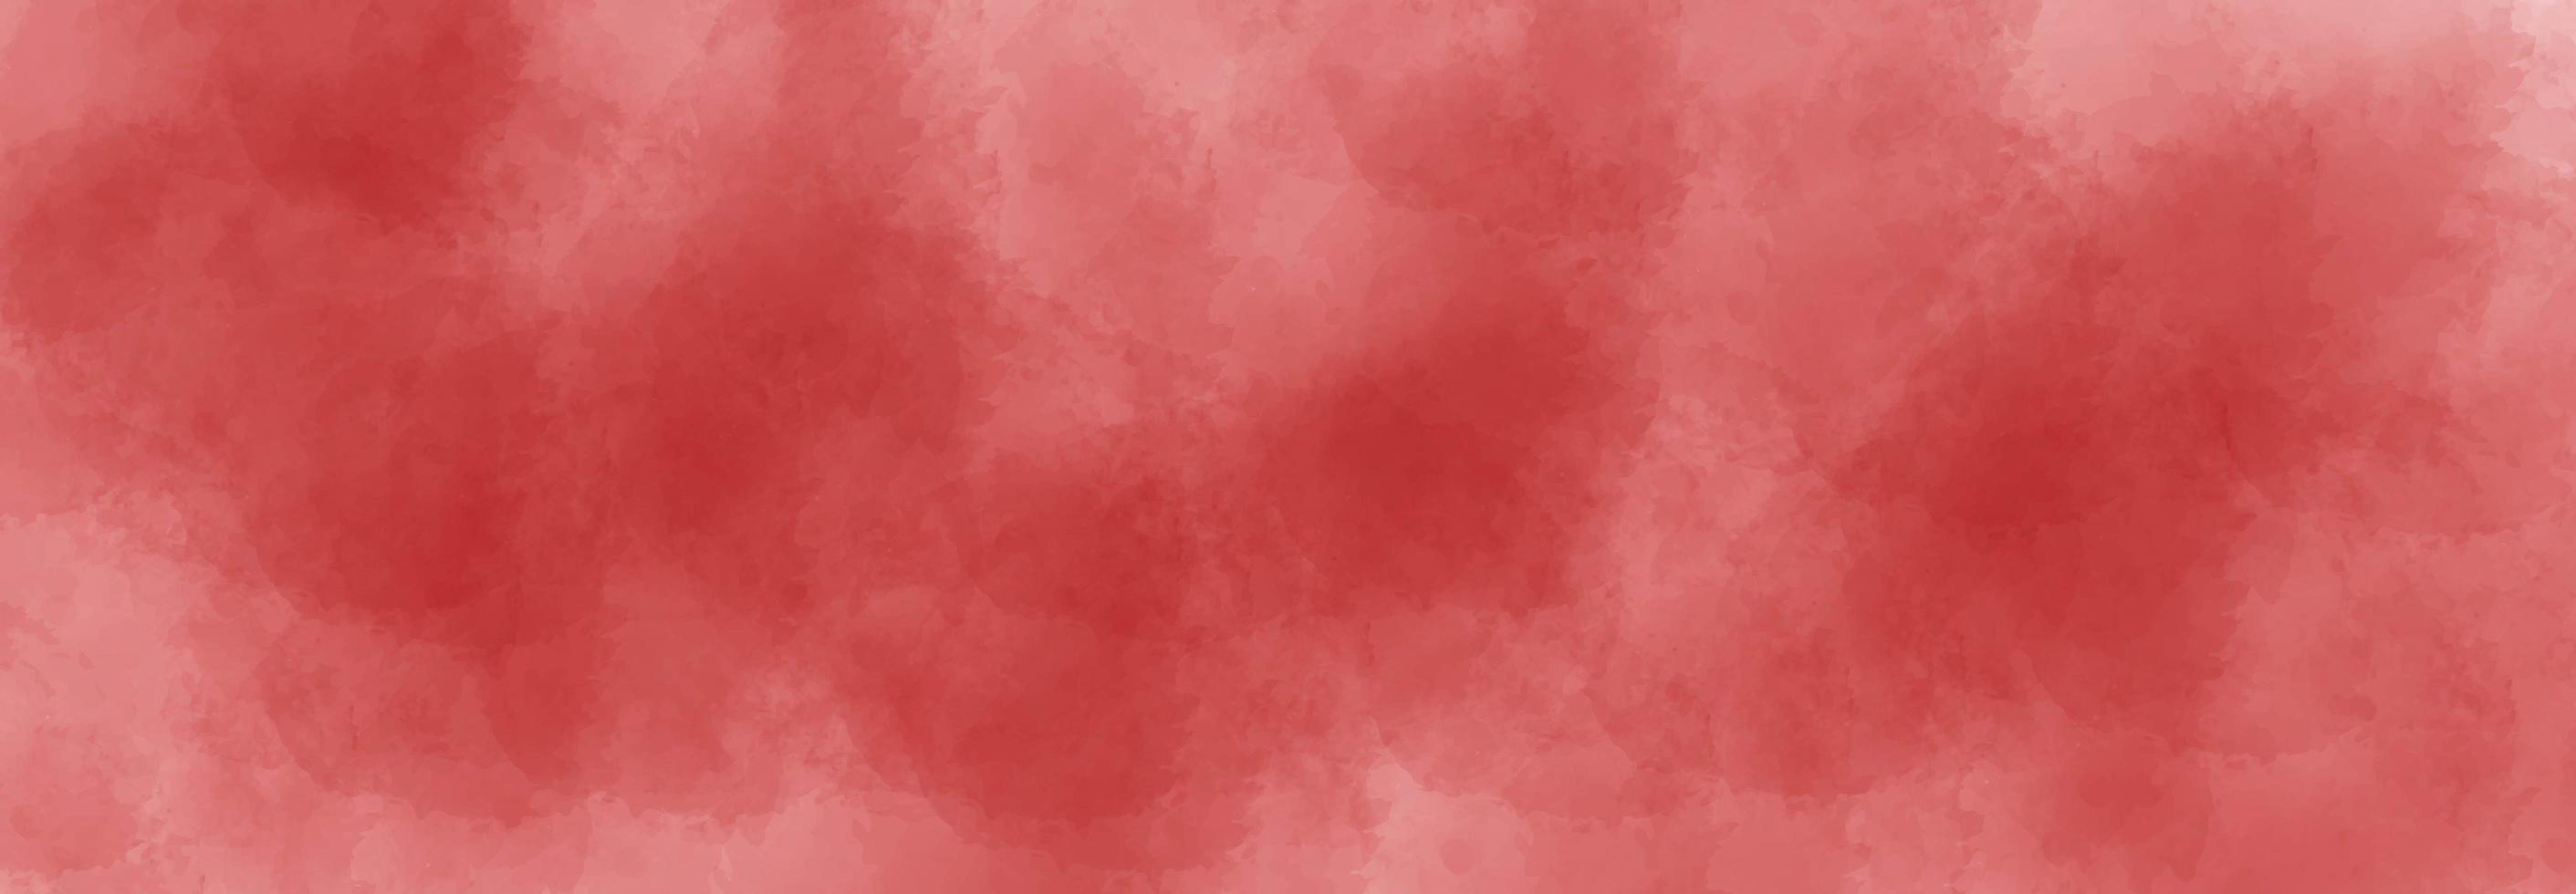 Red watercolor abstract background photo